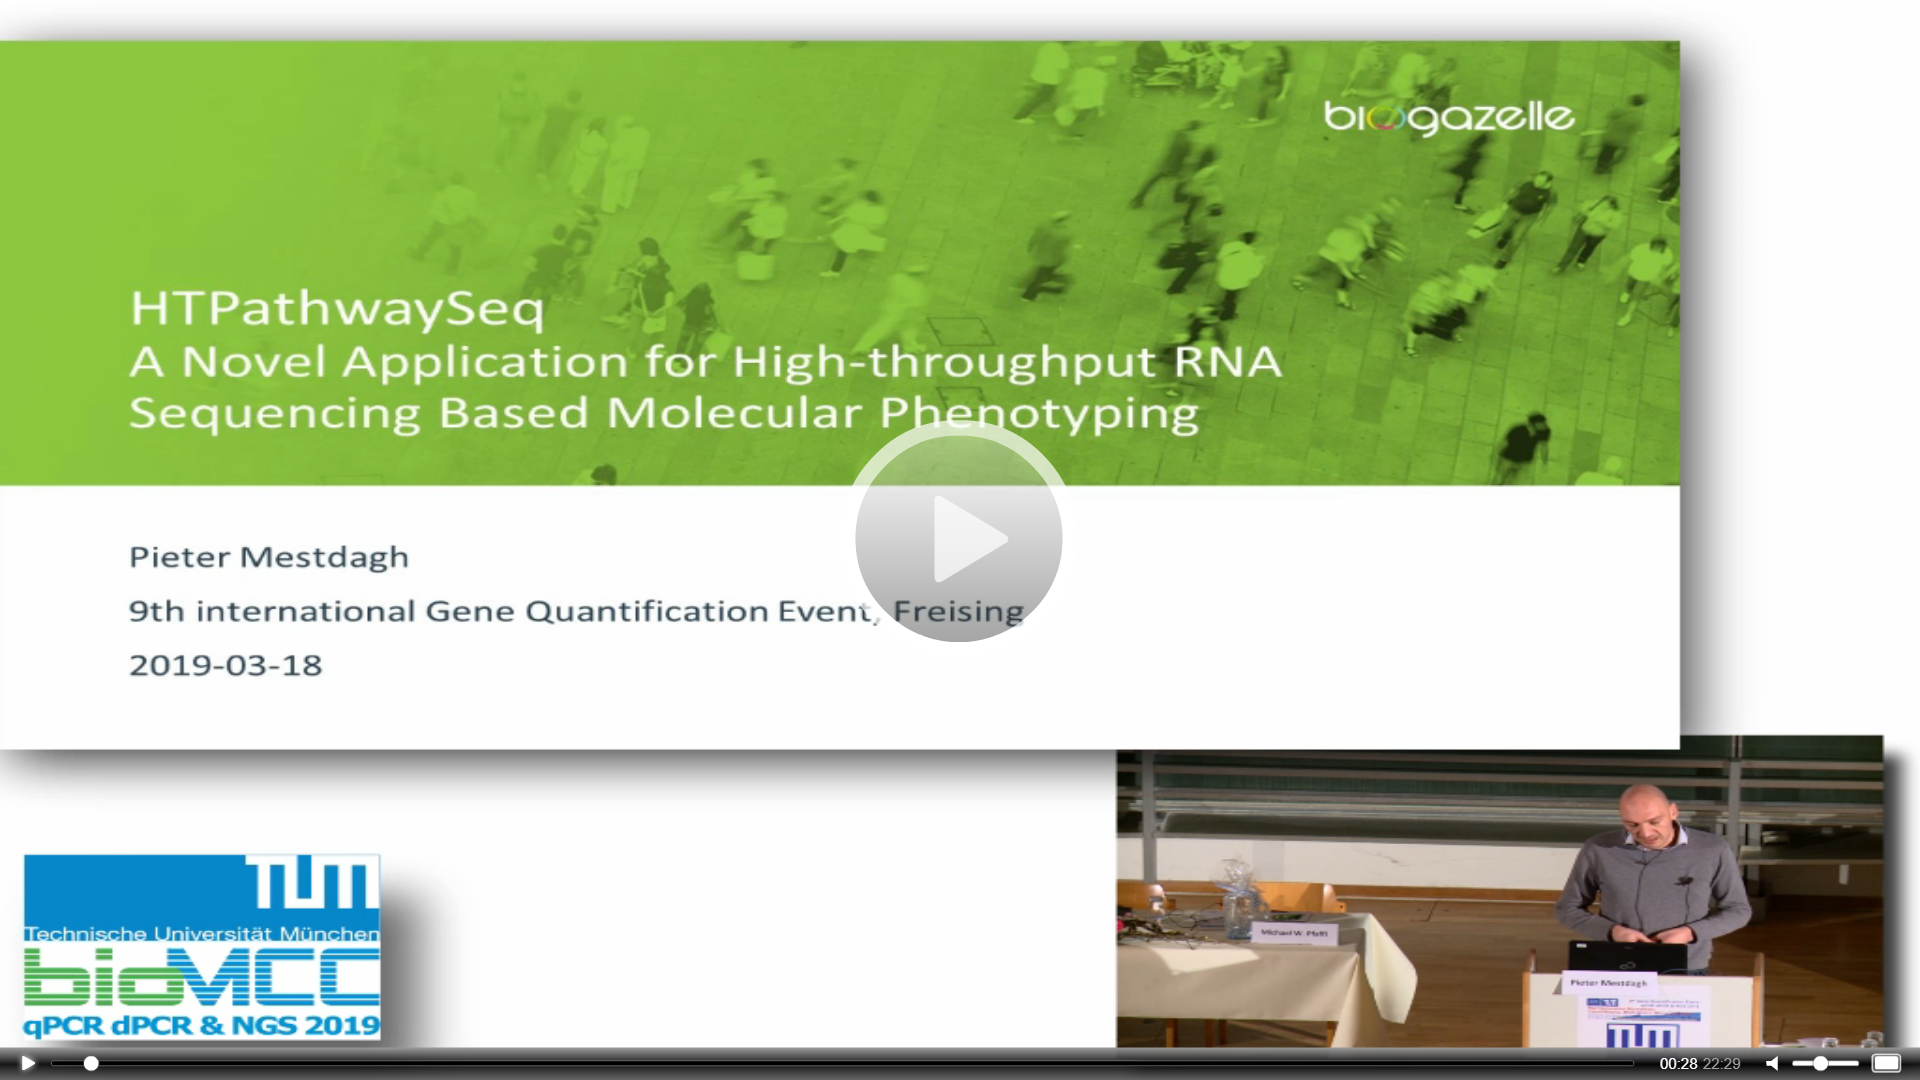 HTPathwaySeq, a Novel Application for High-throughput RNA Sequencing Based Pathway Phenotyping